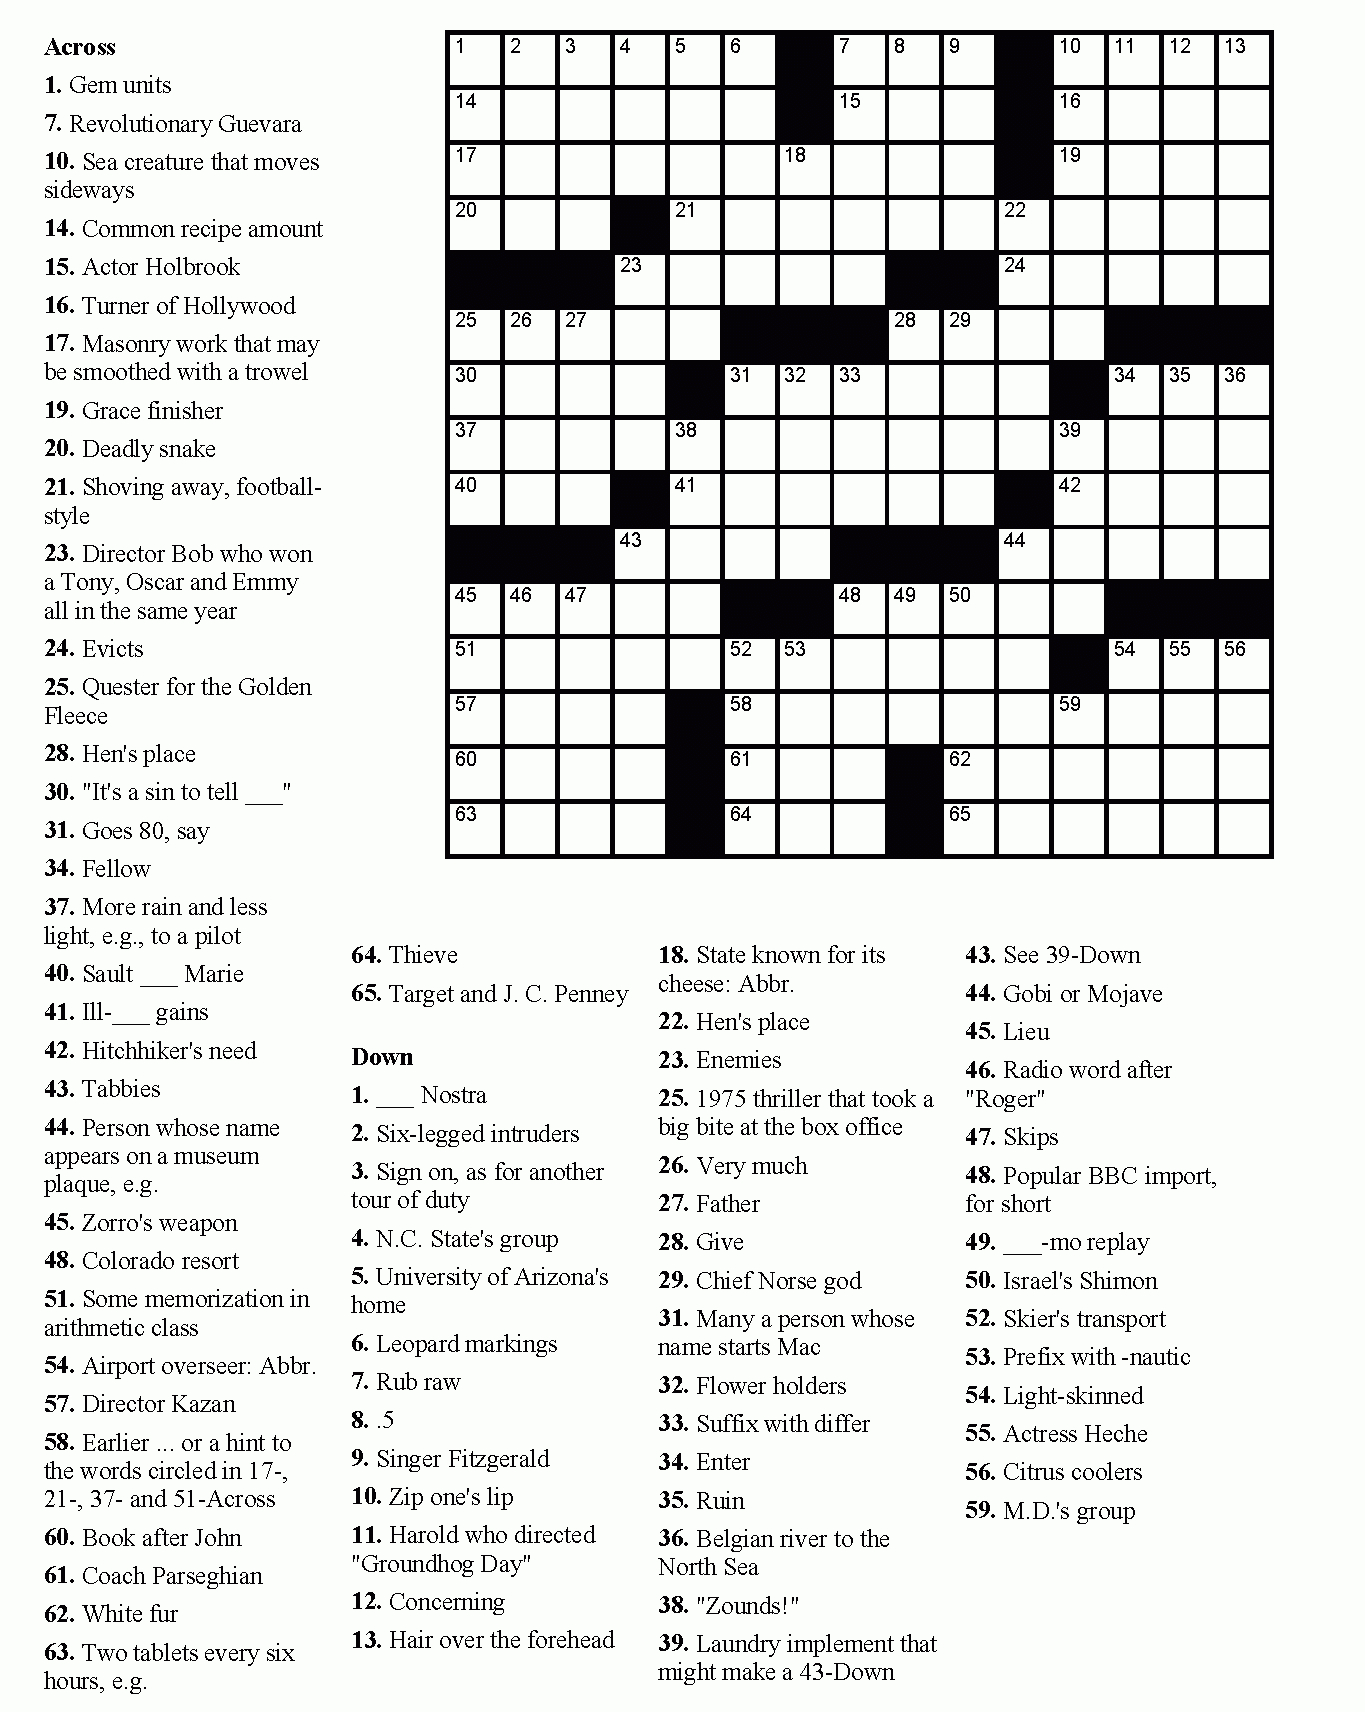 Free Printable Crossword Puzzles Easy For Adults | My Board - Free - Printable Puzzles For Adults